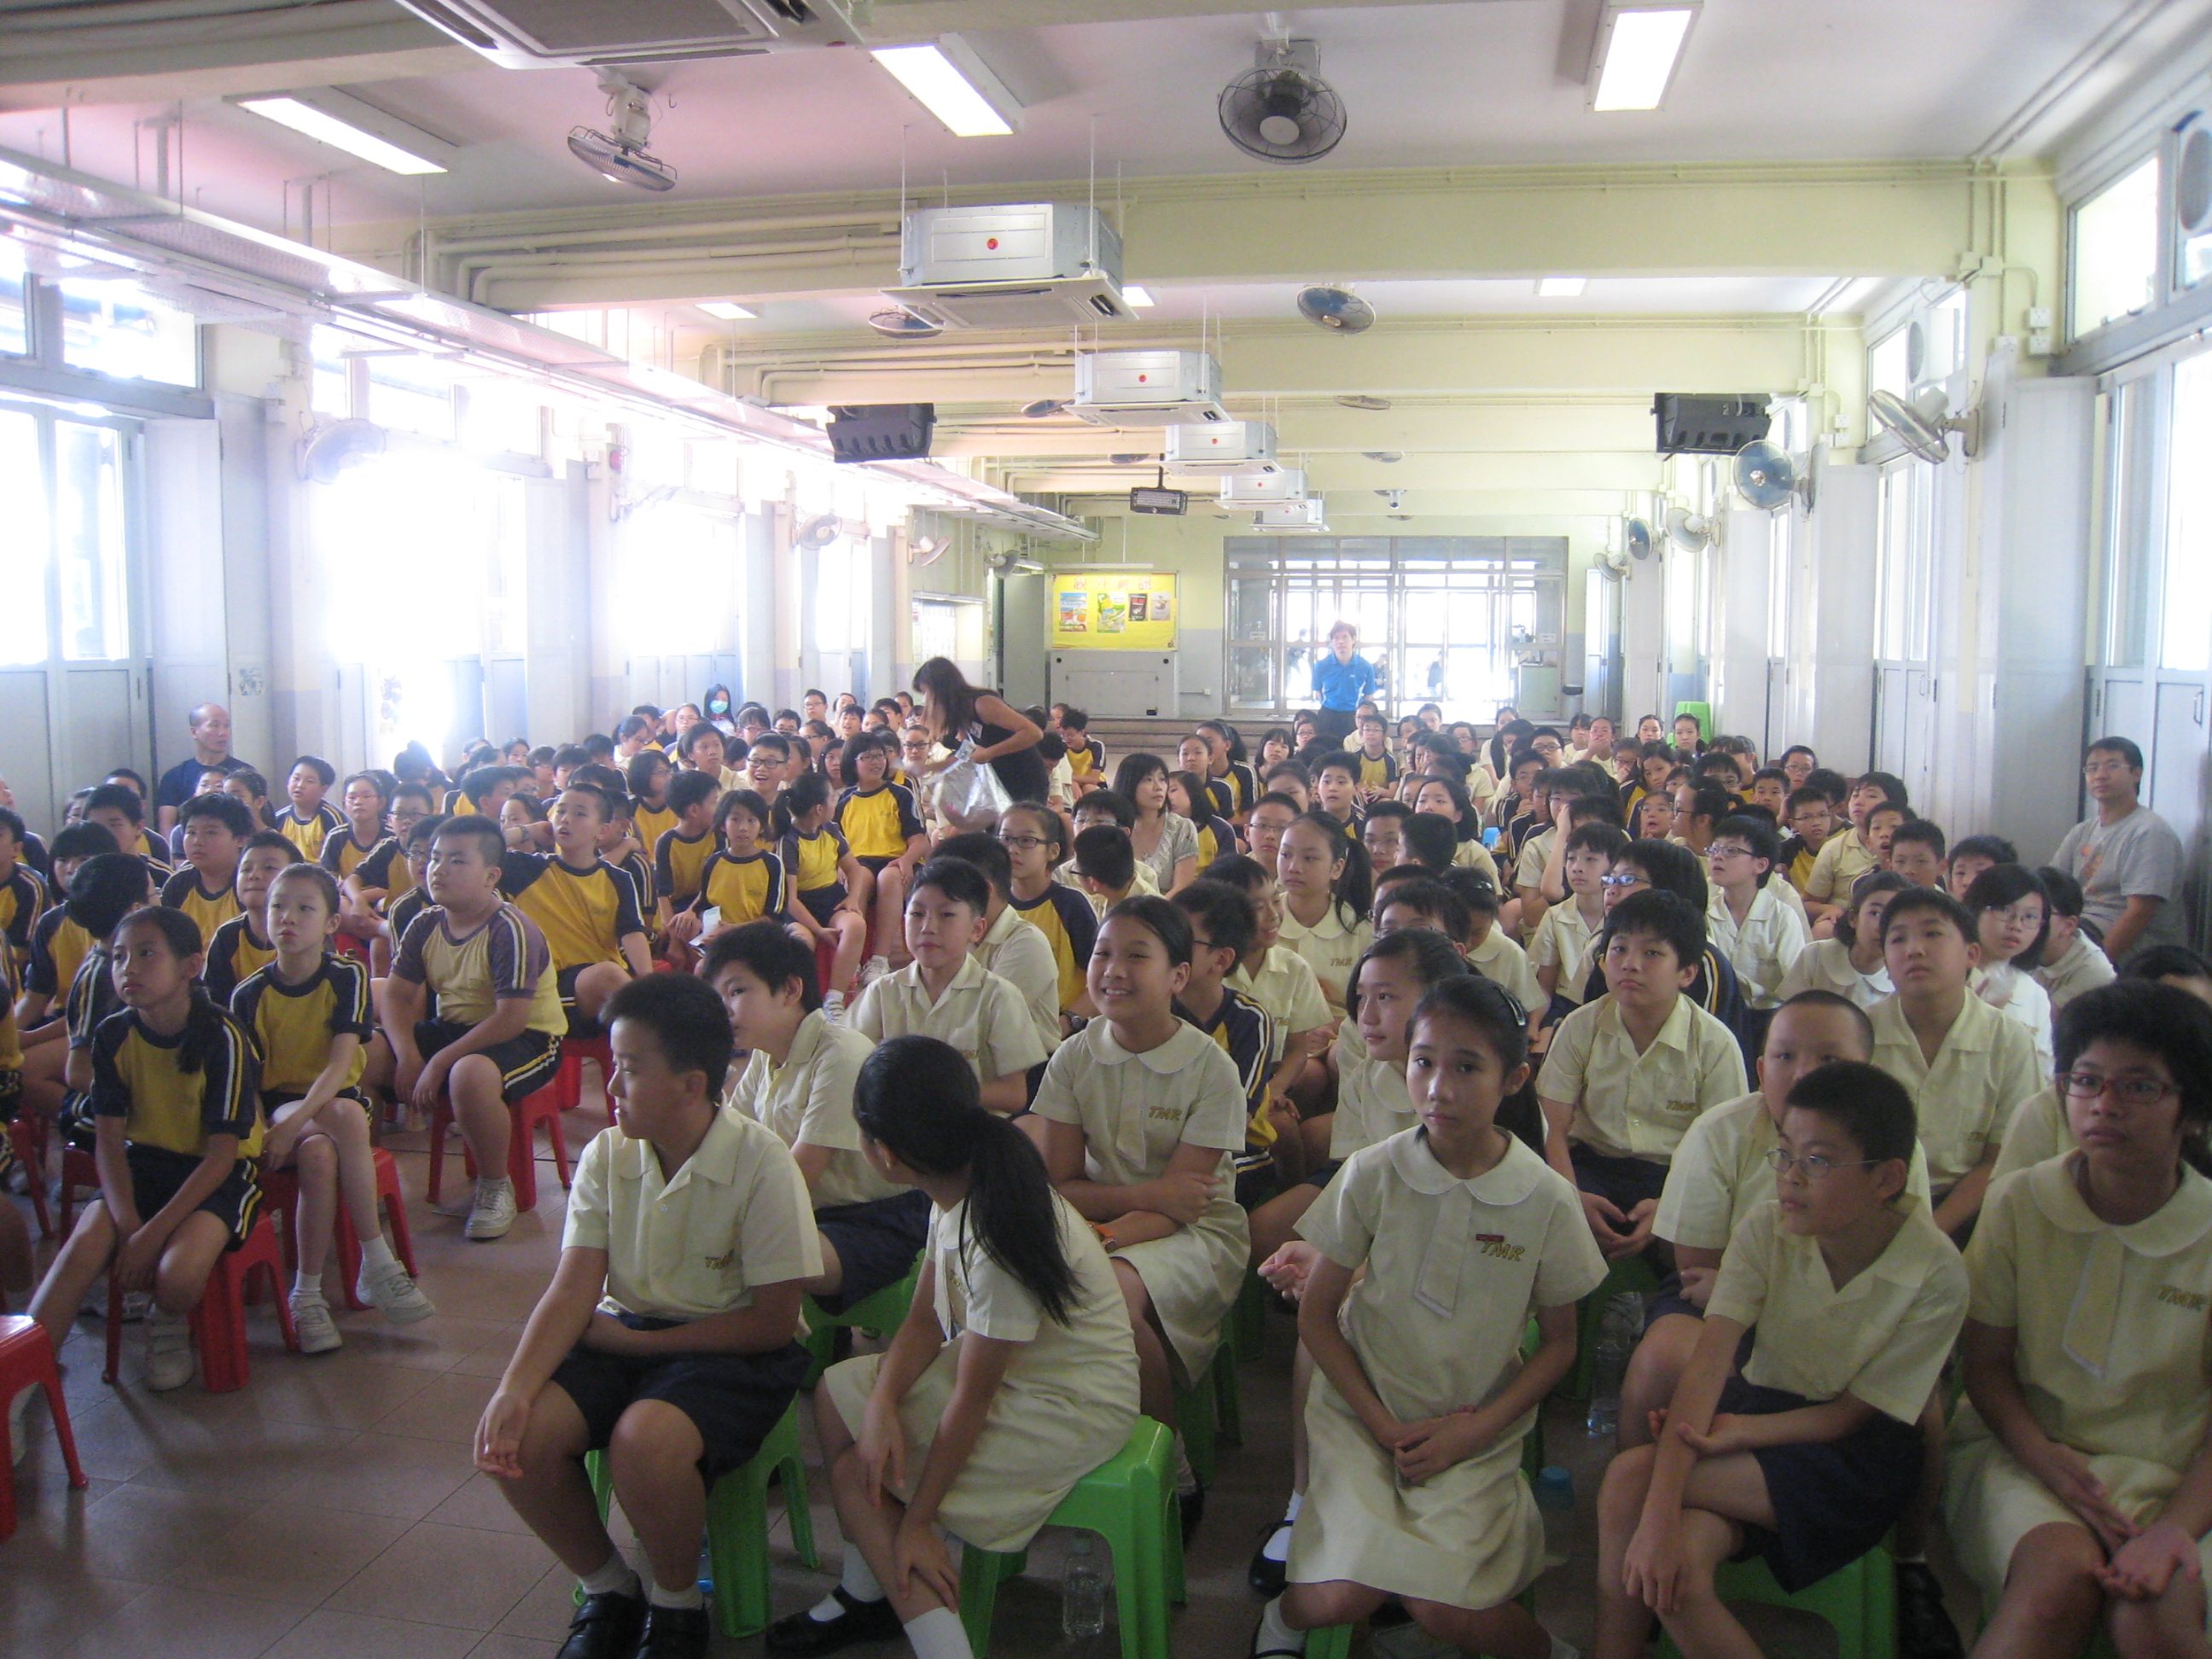 Tong Mei Road Government Primary School